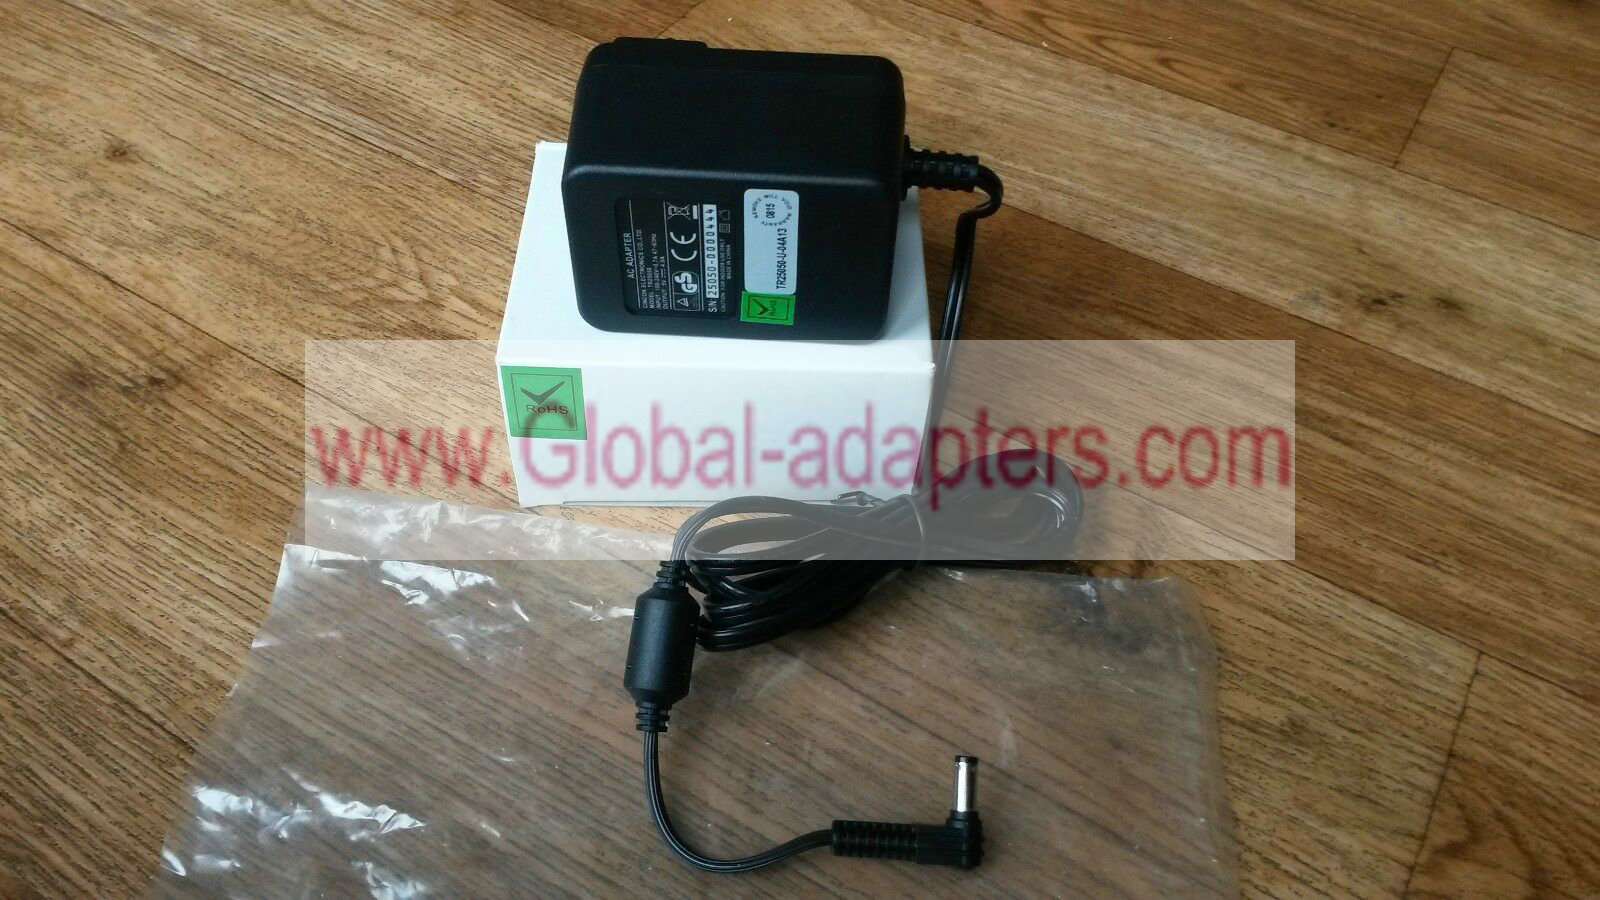 NEW Cincon TR25050-U-04A13 25W 5V 4A TR25050 AC DC Switching Power Adapter - Click Image to Close